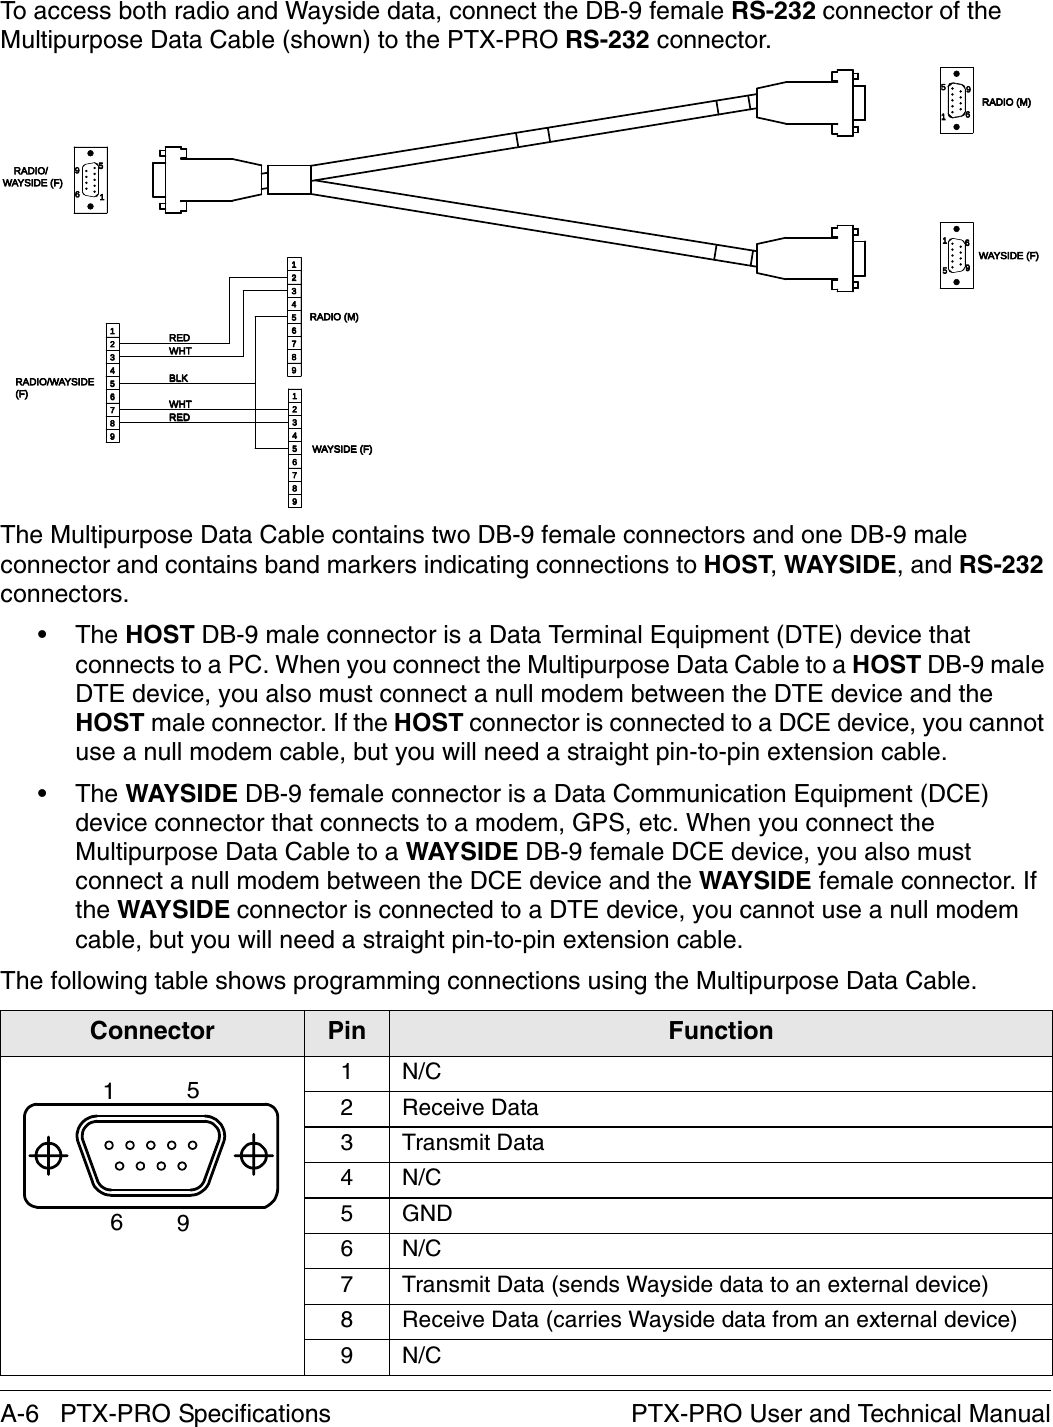 A-6   PTX-PRO Specifications PTX-PRO User and Technical ManualTo access both radio and Wayside data, connect the DB-9 female RS-232 connector of the Multipurpose Data Cable (shown) to the PTX-PRO RS-232 connector. The Multipurpose Data Cable contains two DB-9 female connectors and one DB-9 male connector and contains band markers indicating connections to HOST, WAYSIDE, and RS-232 connectors. •The HOST DB-9 male connector is a Data Terminal Equipment (DTE) device that connects to a PC. When you connect the Multipurpose Data Cable to a HOST DB-9 male DTE device, you also must connect a null modem between the DTE device and the HOST male connector. If the HOST connector is connected to a DCE device, you cannot use a null modem cable, but you will need a straight pin-to-pin extension cable.•The WAYSIDE DB-9 female connector is a Data Communication Equipment (DCE) device connector that connects to a modem, GPS, etc. When you connect the Multipurpose Data Cable to a WAYSIDE DB-9 female DCE device, you also must connect a null modem between the DCE device and the WAYSIDE female connector. If the WAYSIDE connector is connected to a DTE device, you cannot use a null modem cable, but you will need a straight pin-to-pin extension cable.The following table shows programming connections using the Multipurpose Data Cable.Connector Pin Function1N/C2 Receive Data3 Transmit Data4N/C5GND6N/C7 Transmit Data (sends Wayside data to an external device)8 Receive Data (carries Wayside data from an external device)9N/C995511661166995555116699REDREDWHTWHT557766443322118899998811223344667755998811223344667755WHTWHTREDREDBLKBLKRADIO (M)RADIO (M)WAYSIDE (F)WAYSIDE (F)RADIO (M)RADIO (M)WAYSIDE (F)WAYSIDE (F)RADIO/WAYSIDE             RADIO/WAYSIDE             (F)(F)    RADIO/    RADIO/WAYSIDE (F)WAYSIDE (F)1569